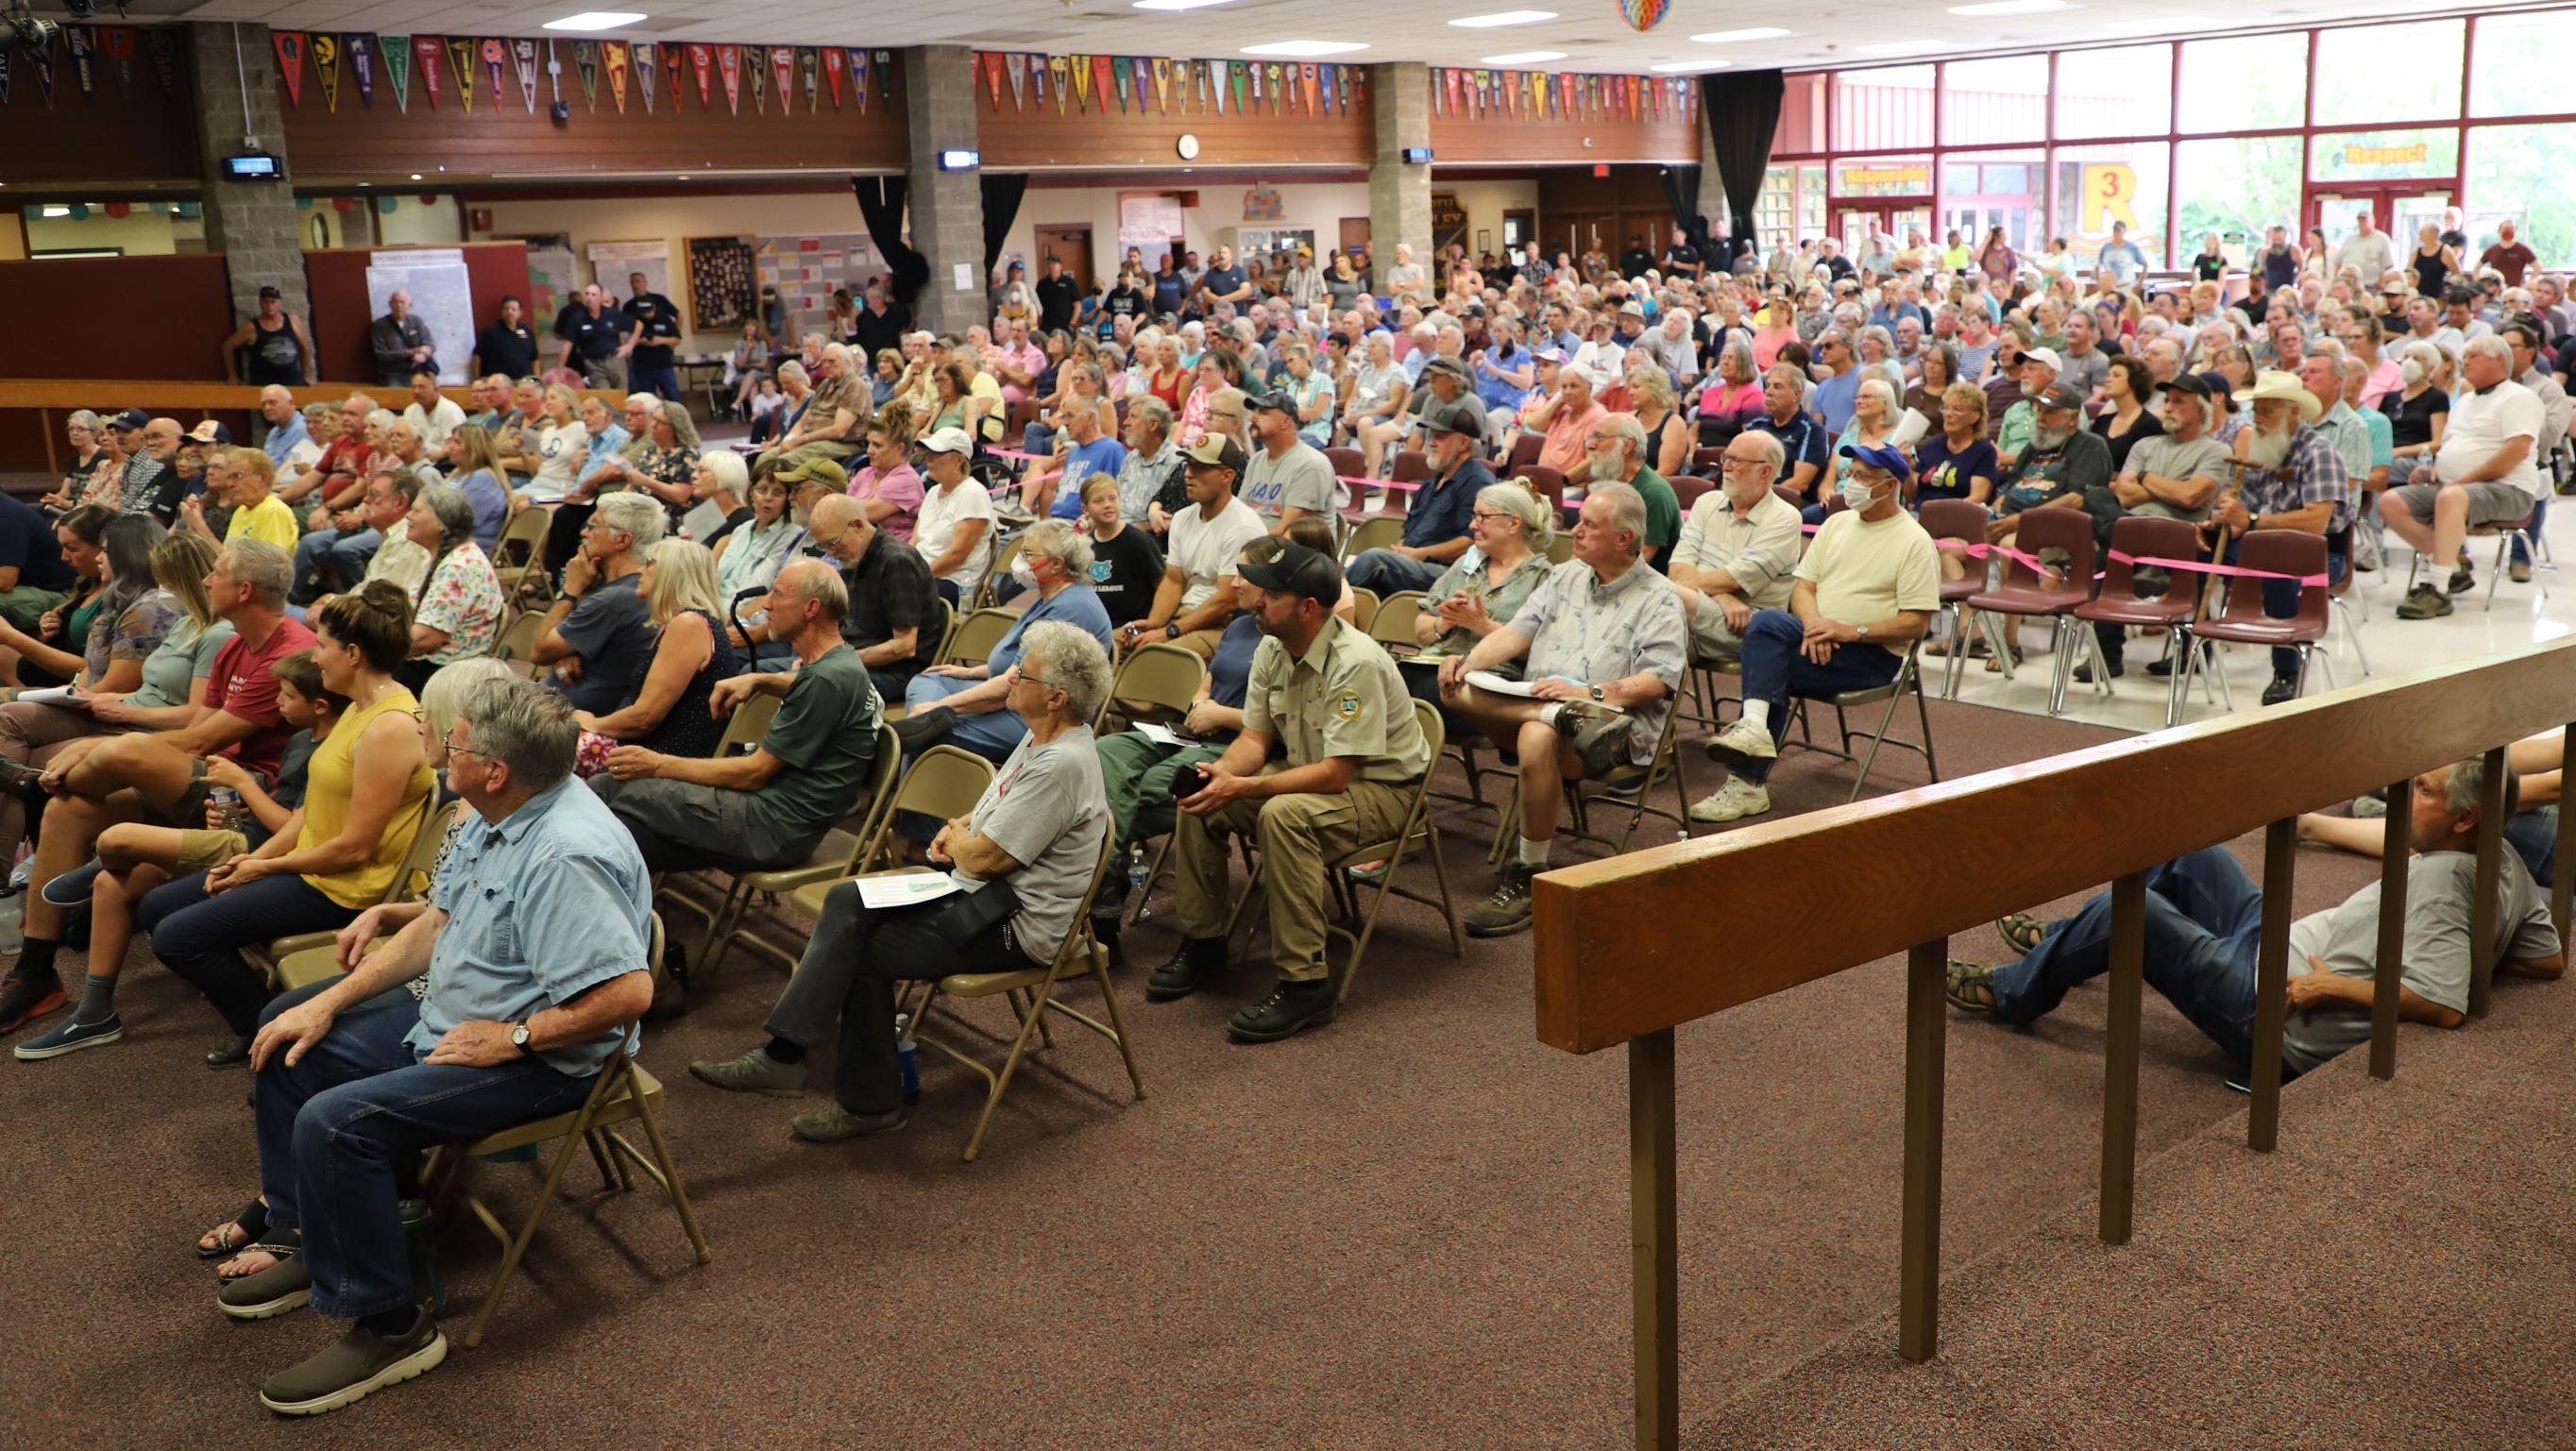 A large audience of people are sitting in chairs and on the floor, listening to the speakers at the community meeting held August 30 in Grants Pass.